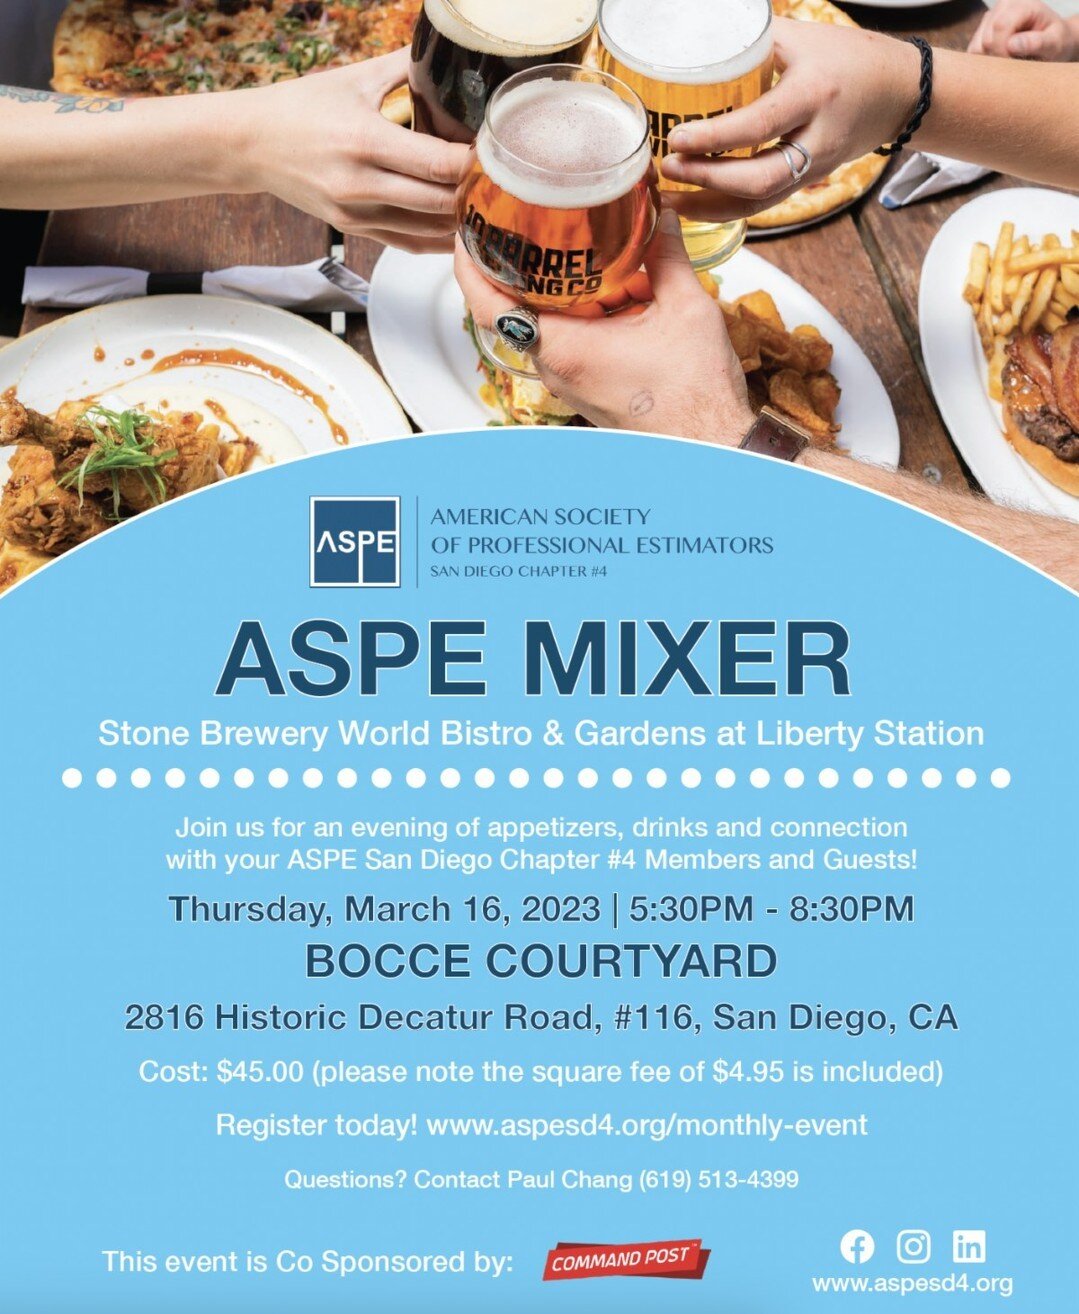 🍻- **** You still have time to Register for this event****
ASPE San Diego Chapter #4, would like to invite you to our 2nd year mixer event at Stone Brewery at Liberty Station on March 1️⃣6️⃣, 2023 at 5:30PM. Come and enjoy networking, meeting the AS